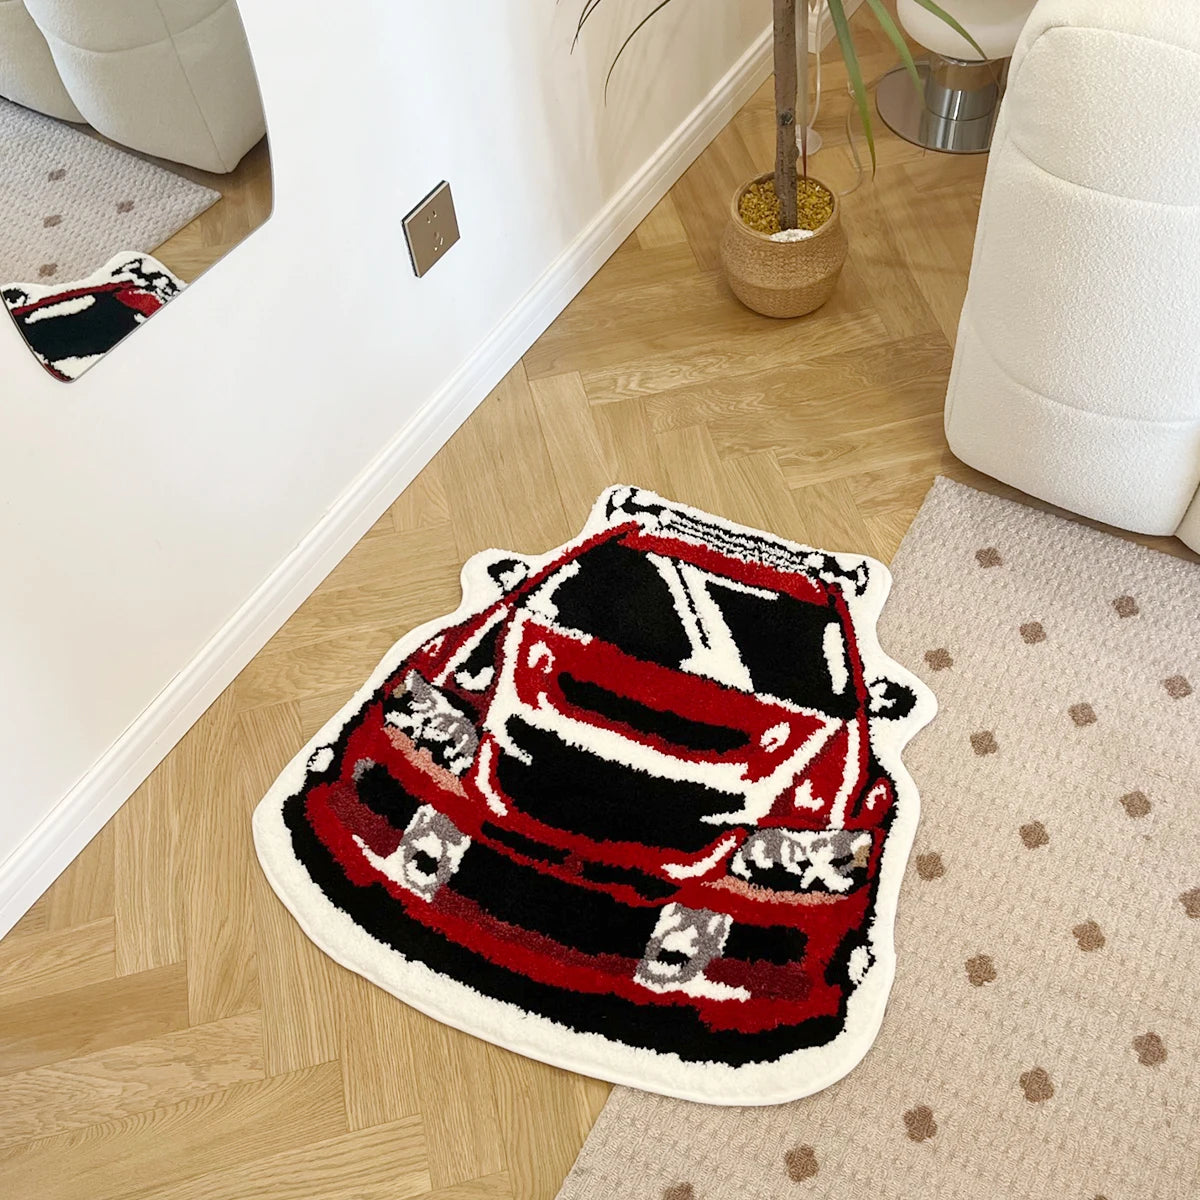 Red Racing Car Shaped Tufting Rug - Soft, Non-Slip Floor Mat